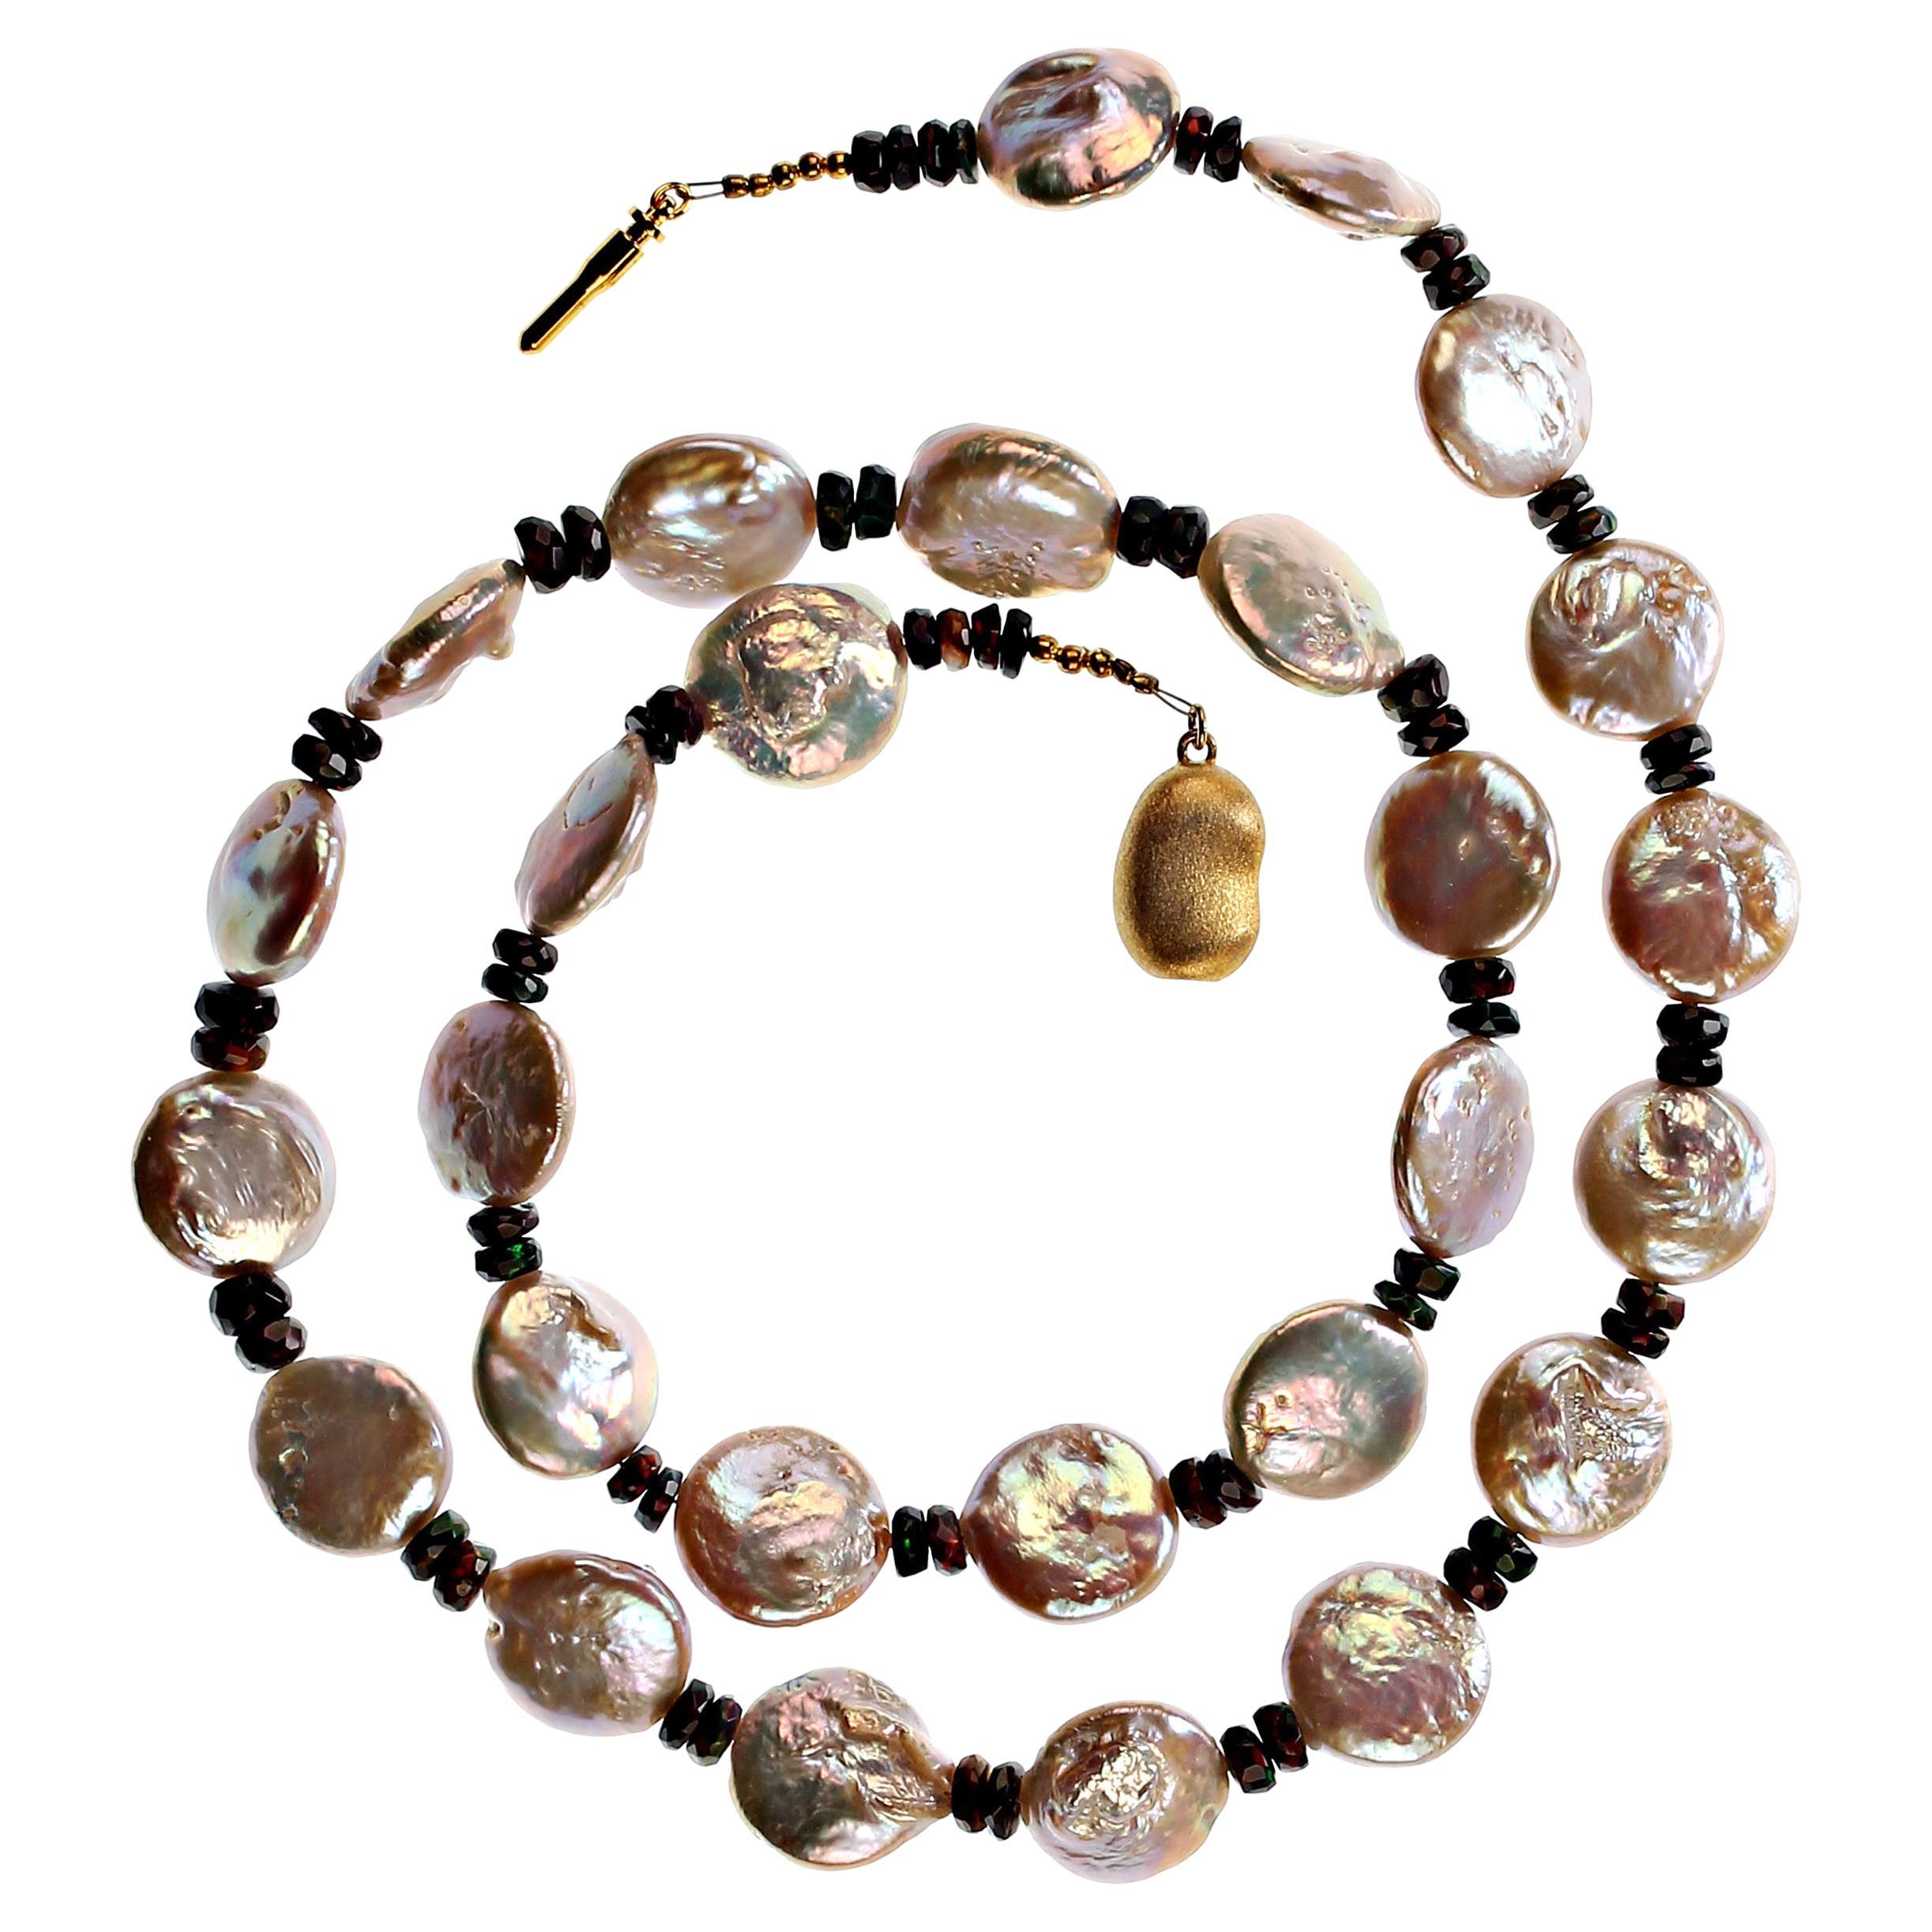 Sold at Auction: Sautoire necklace in the style Coco Chanel pearls & tiger  eyes stones